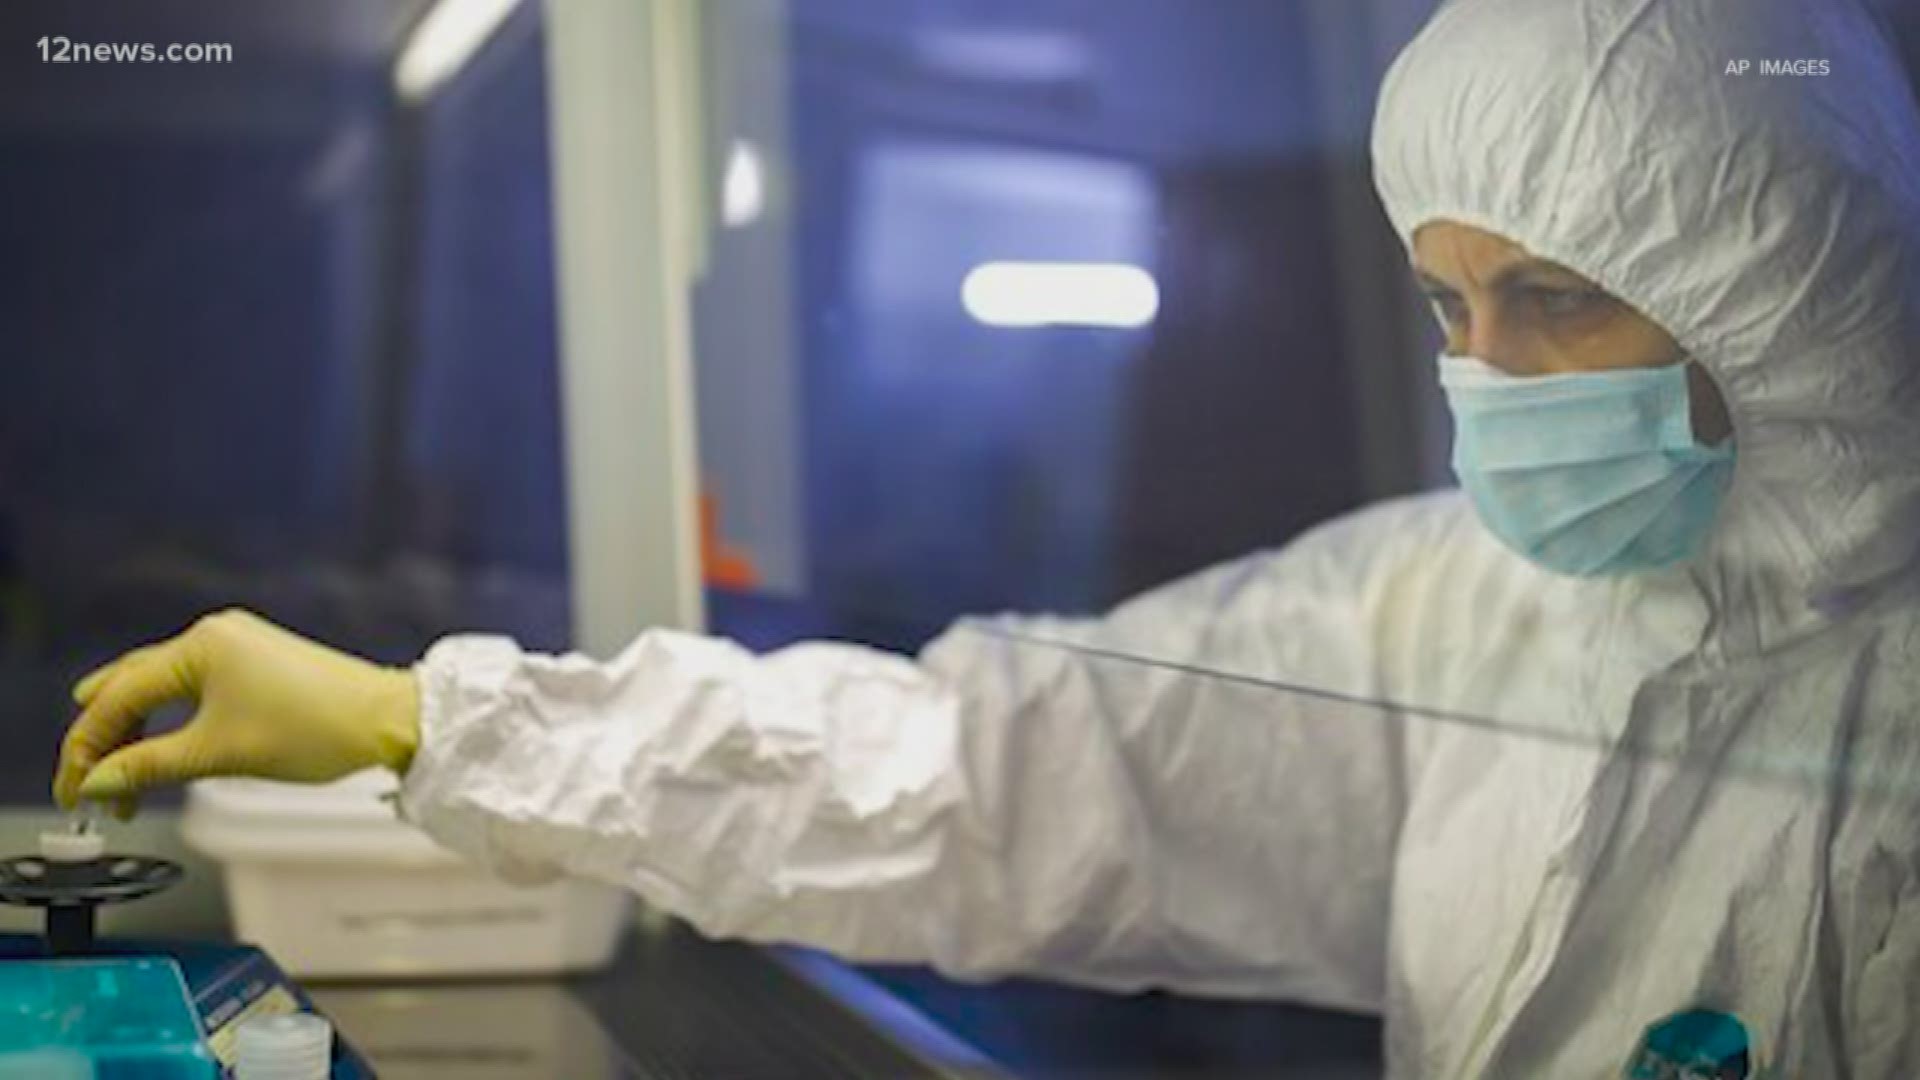 722 people have died from the virus in China while another 3300 people have tested positive.